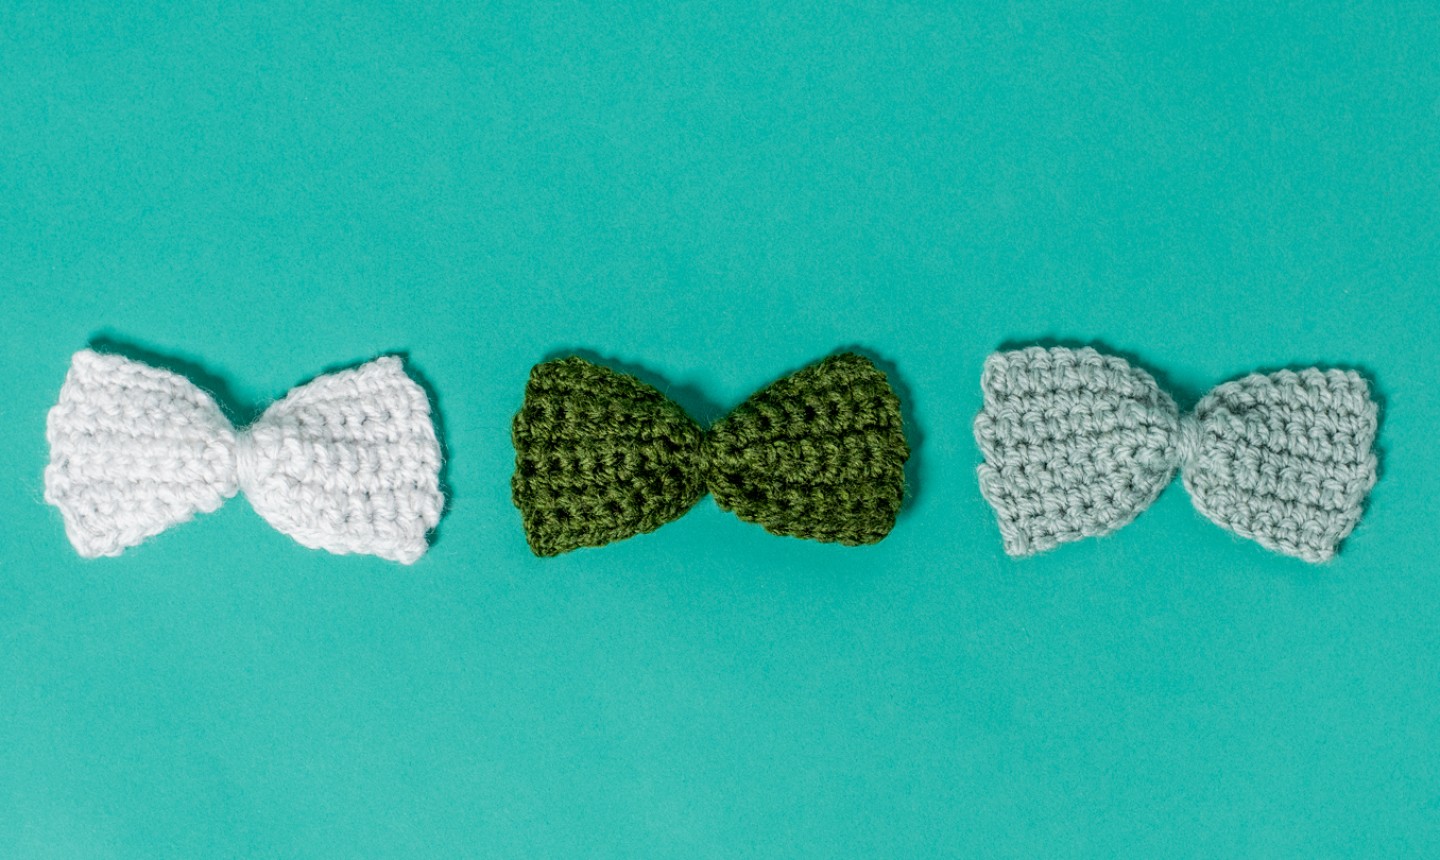 crochet bows on teal backgrouns